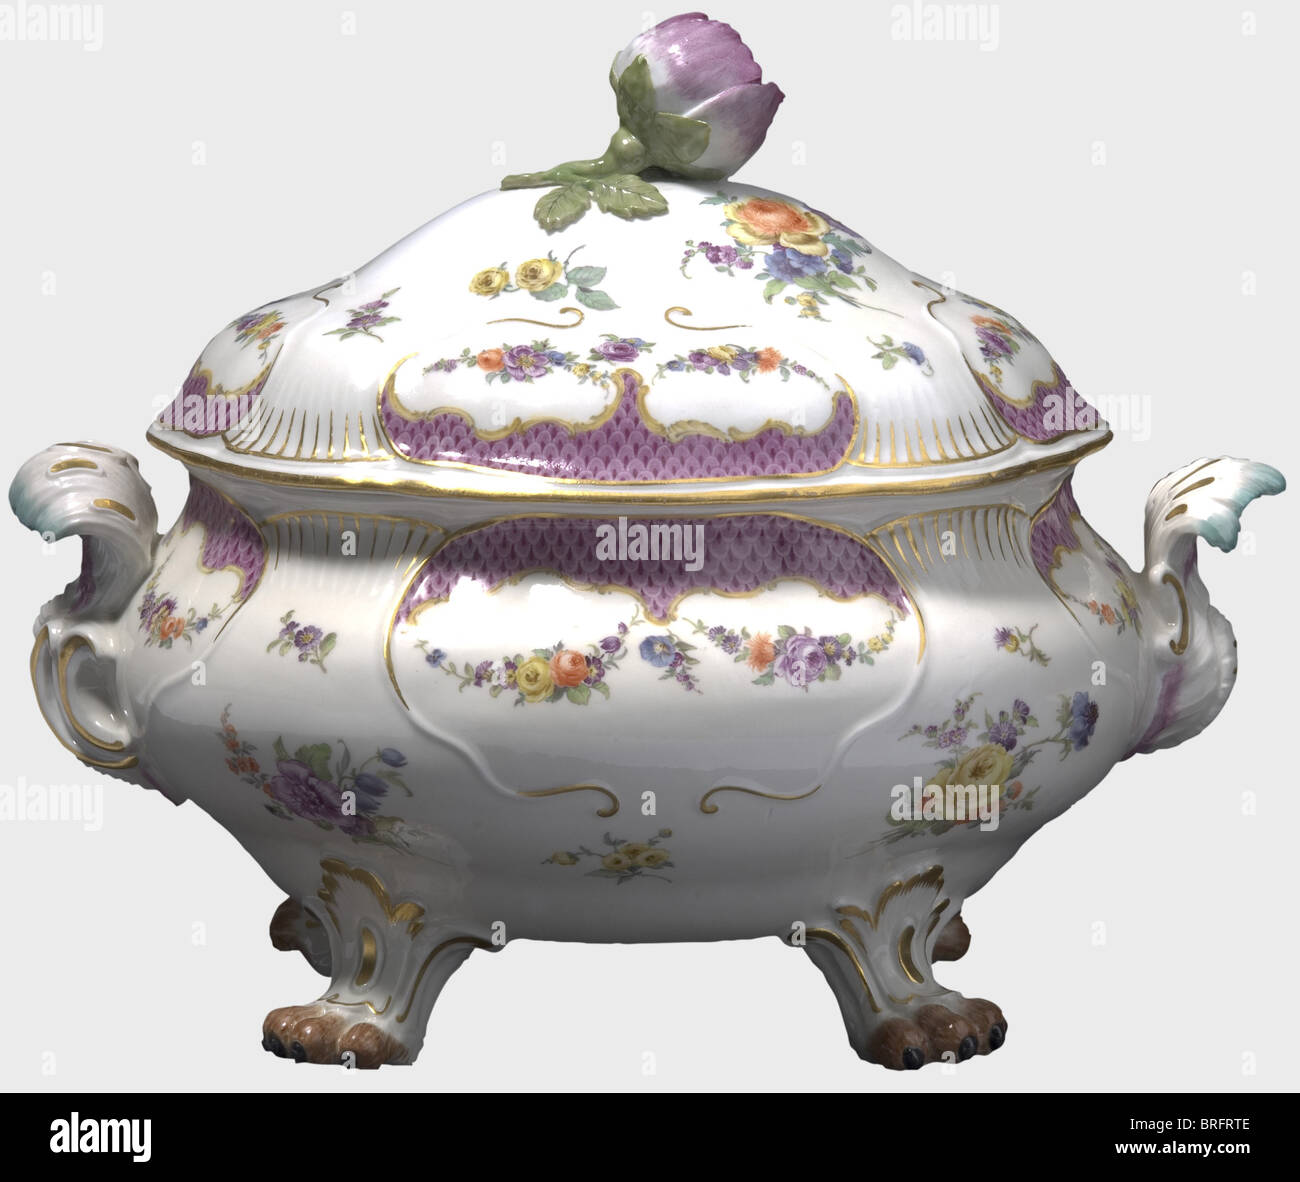 Friedrich II - Count Kurt Christoph von Schwerin(1684 - 1757),a covered porcelain terrine,Meissen,circa 1746/50. Rococo terrine on four animal paws,with rocaille handles,lid handle in the shape of a rose,hand-painted decorative flowers in colour,and a surrounding purple-coloured,scalloped rim. The service was a gift from Frederick the Great to his Field Marshal Schwerin. The occasion is so far unknown,however,it may perhaps be dated to 1754. Underglaze sword mark on the bottom. 30 x 26 x 22 cm. historic,historical,18th century,Prussian,Prussia,G,Additional-Rights-Clearences-Not Available Stock Photo